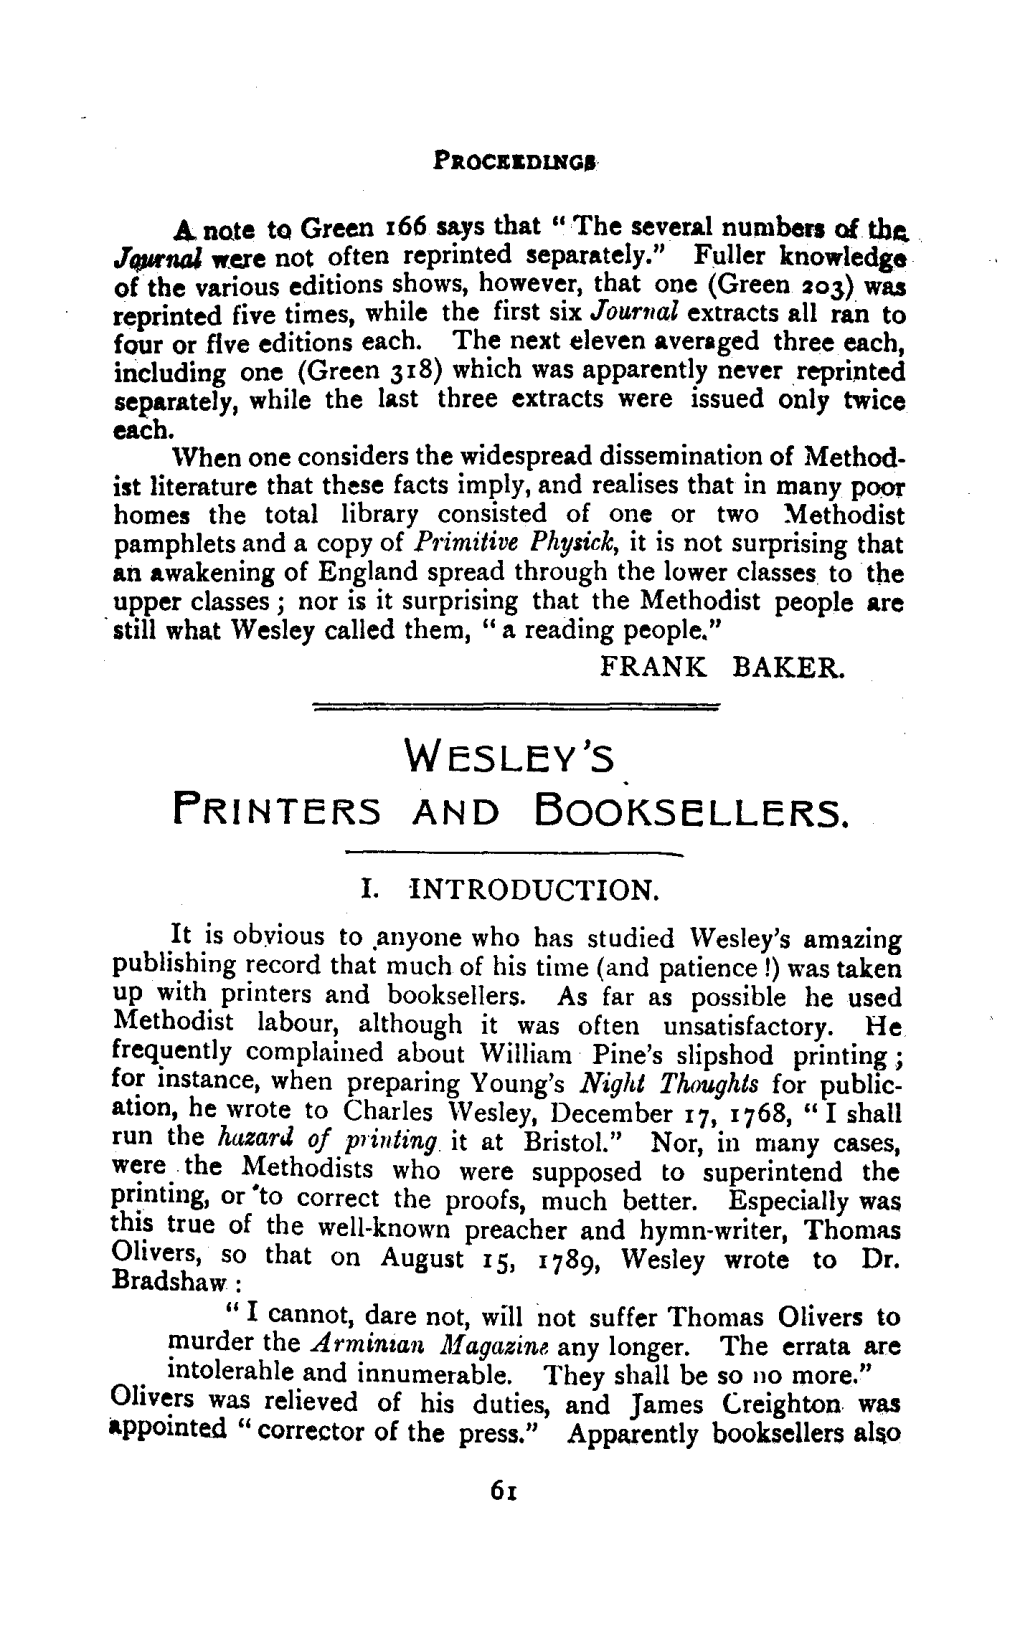 WESLEY's Frinters and BOOKSELLERS